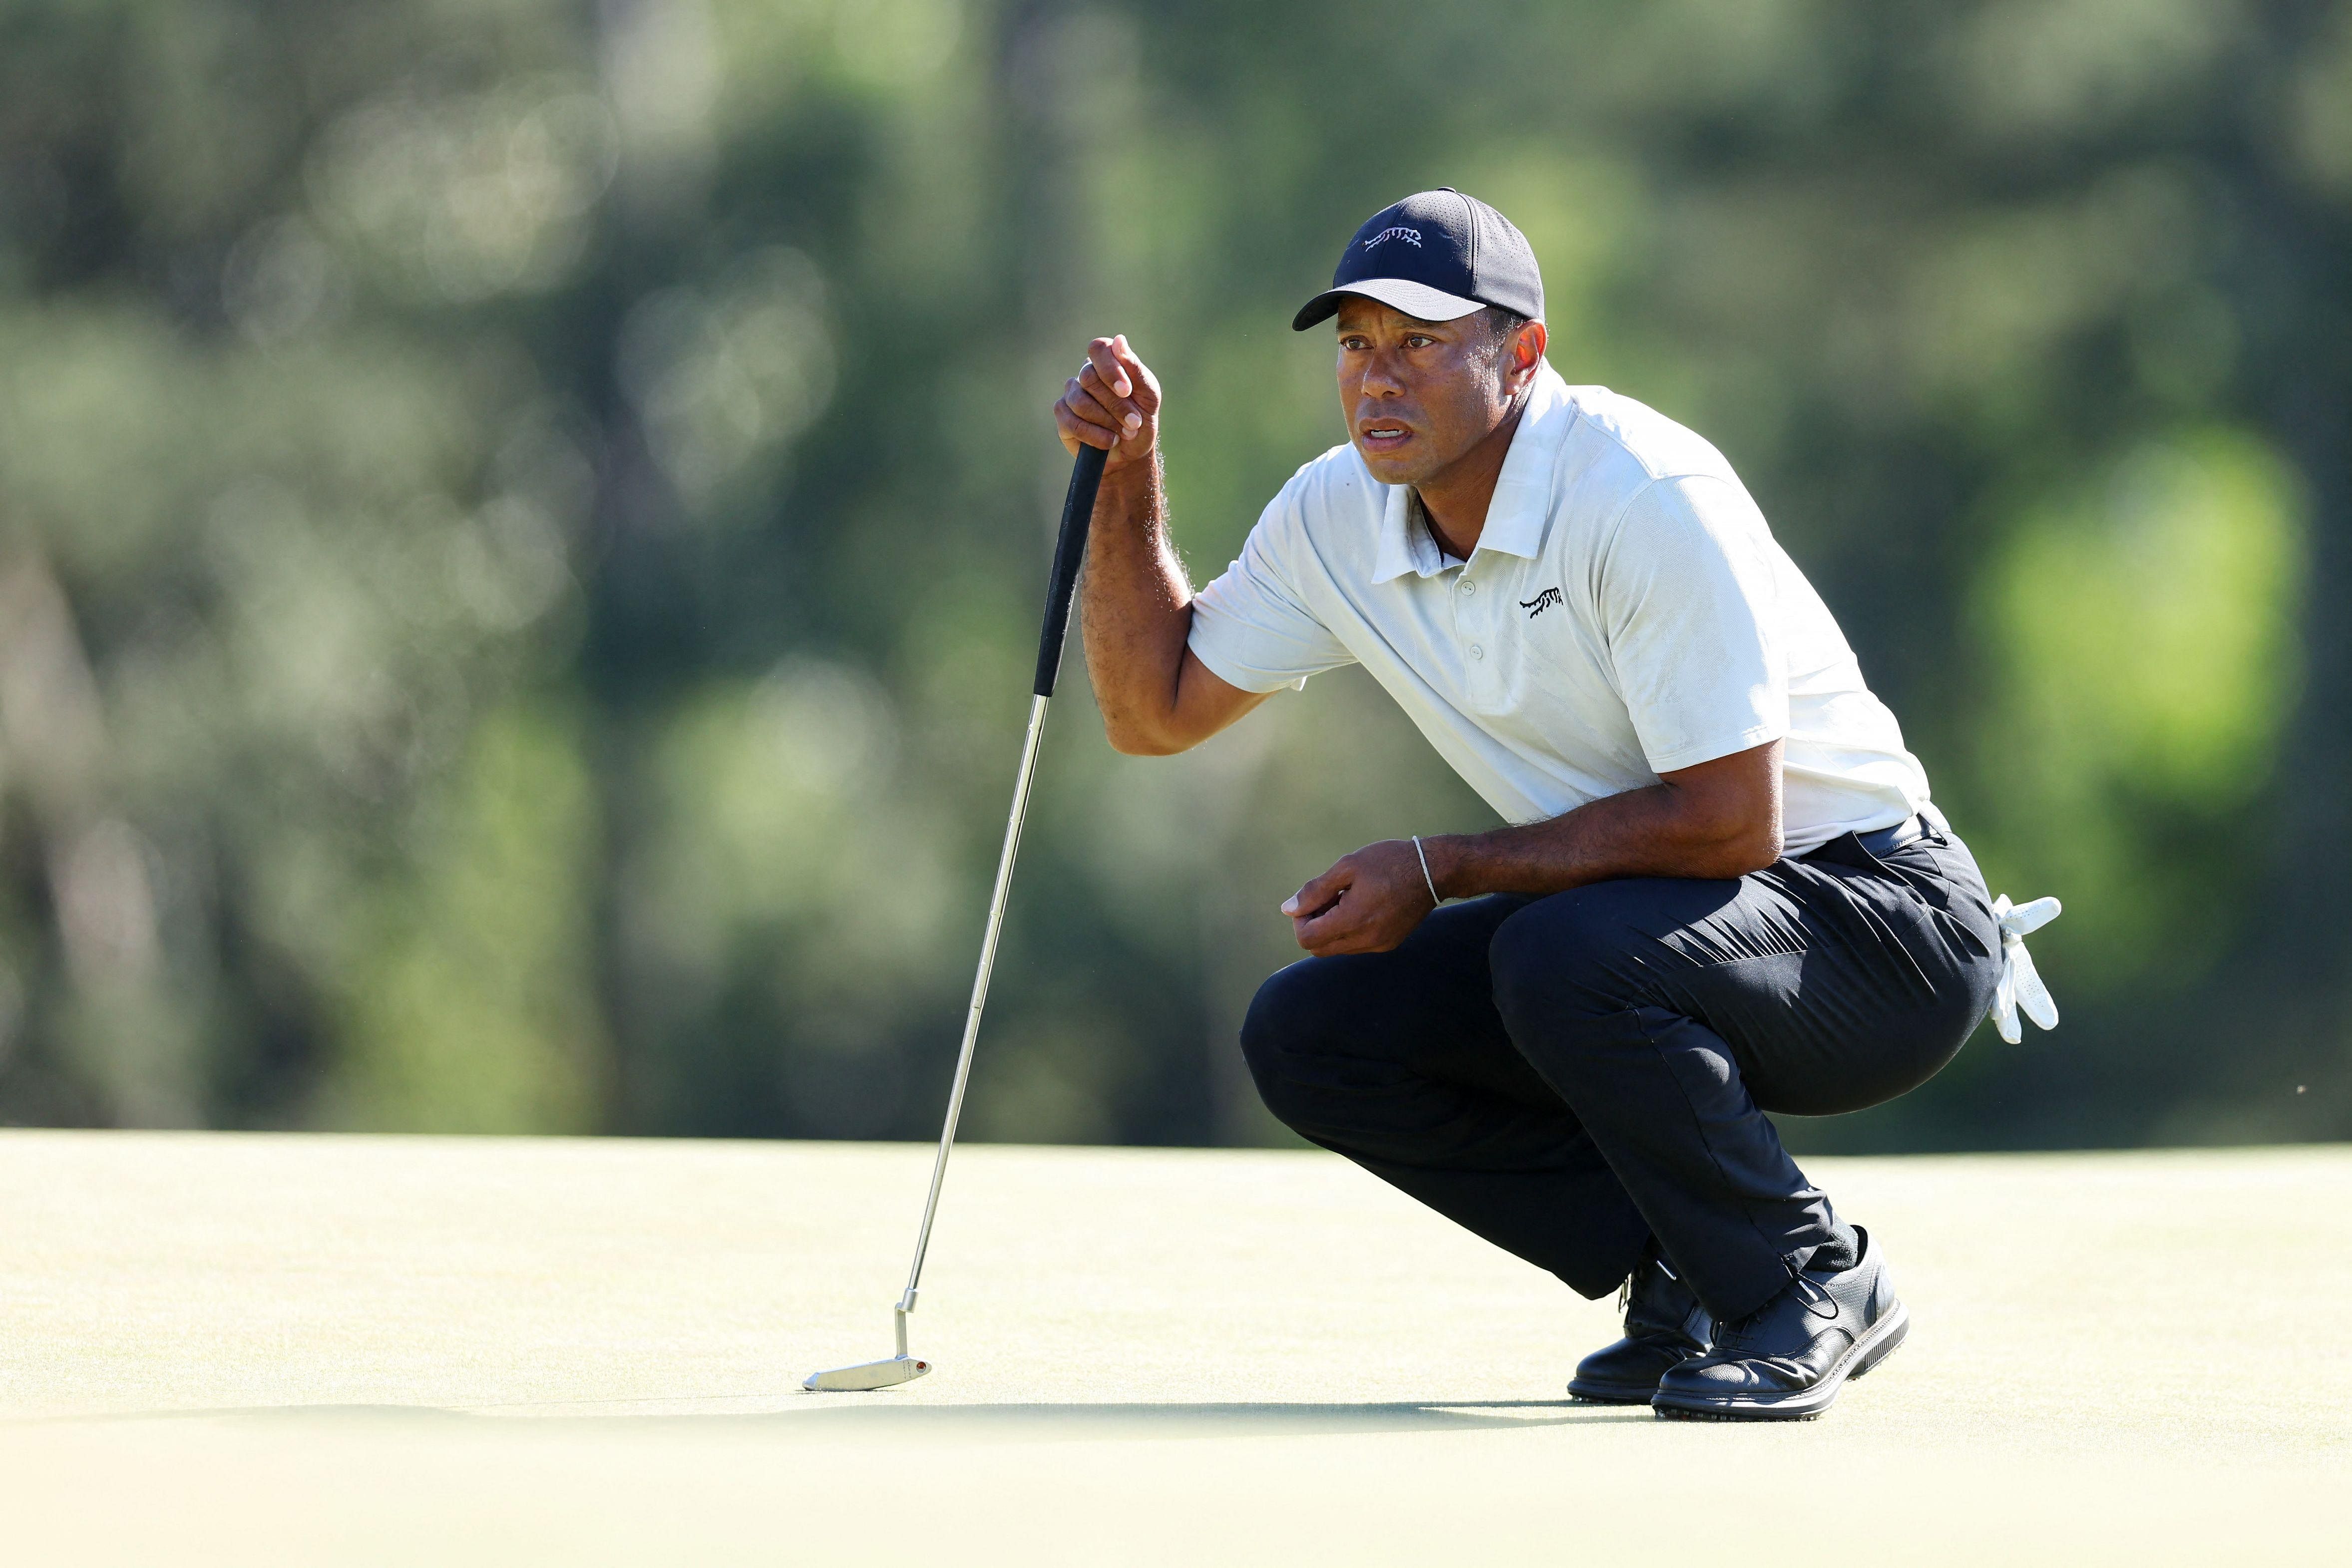 Tiger Woods’ dreamy talk of Green Jacket ends in nightmare round